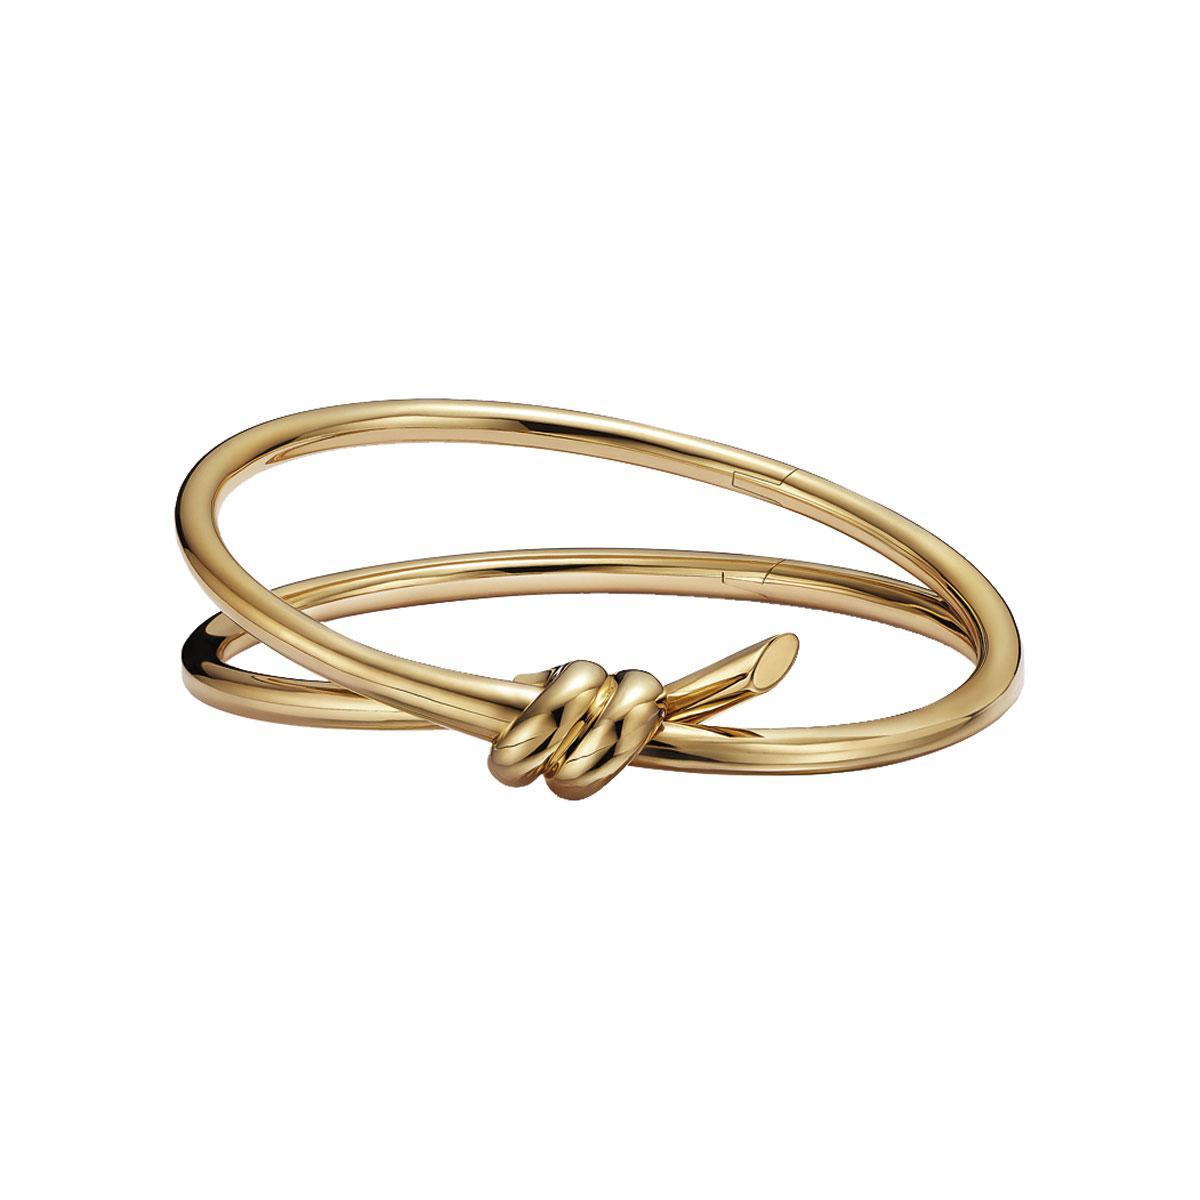 Armband in geel goud uit de Knot Collection, 8350 euro, Tiffany & Co, be.tiffany.com